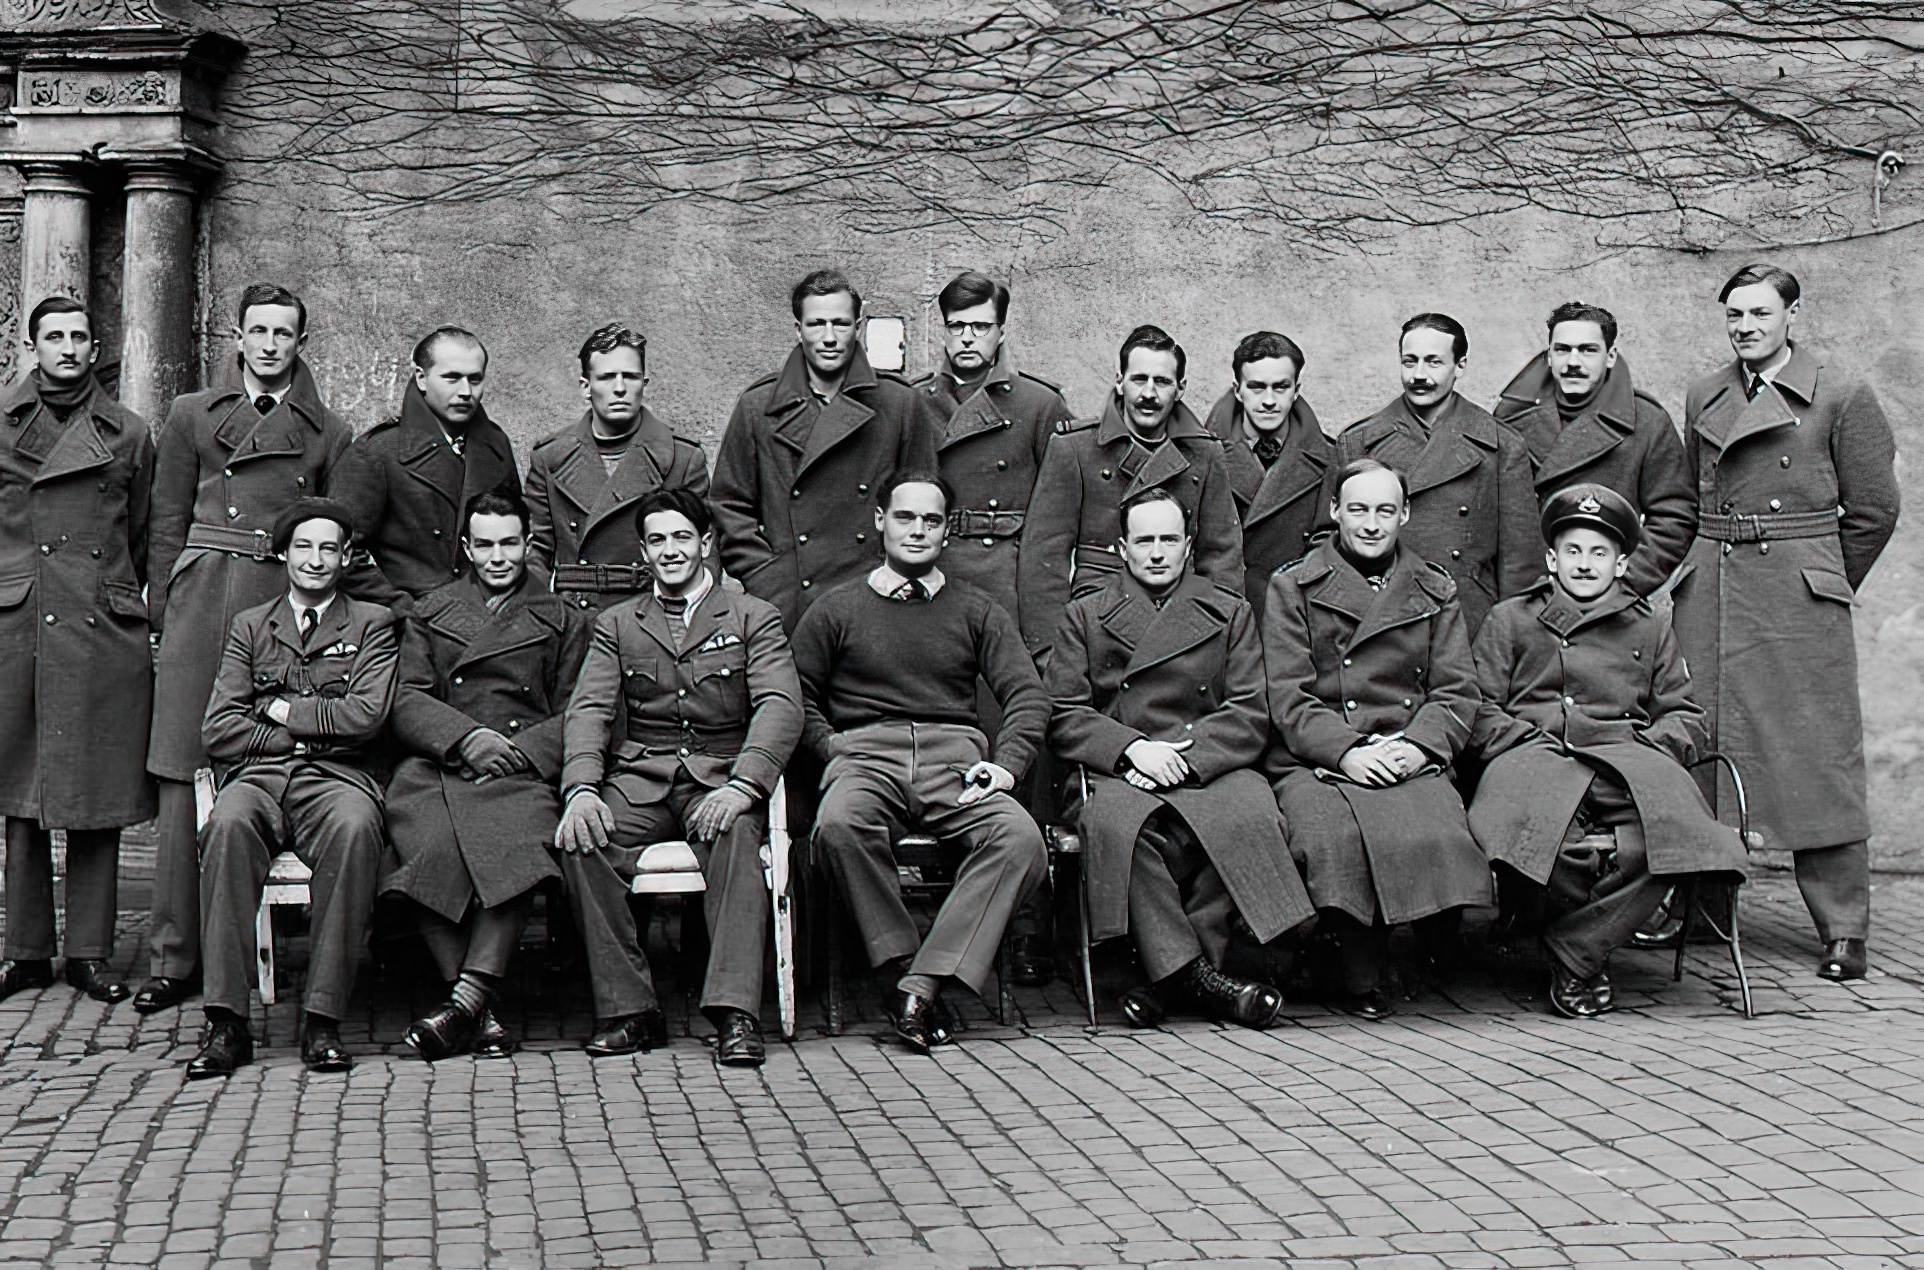 Bader sitting middle, with a mess in Colditz